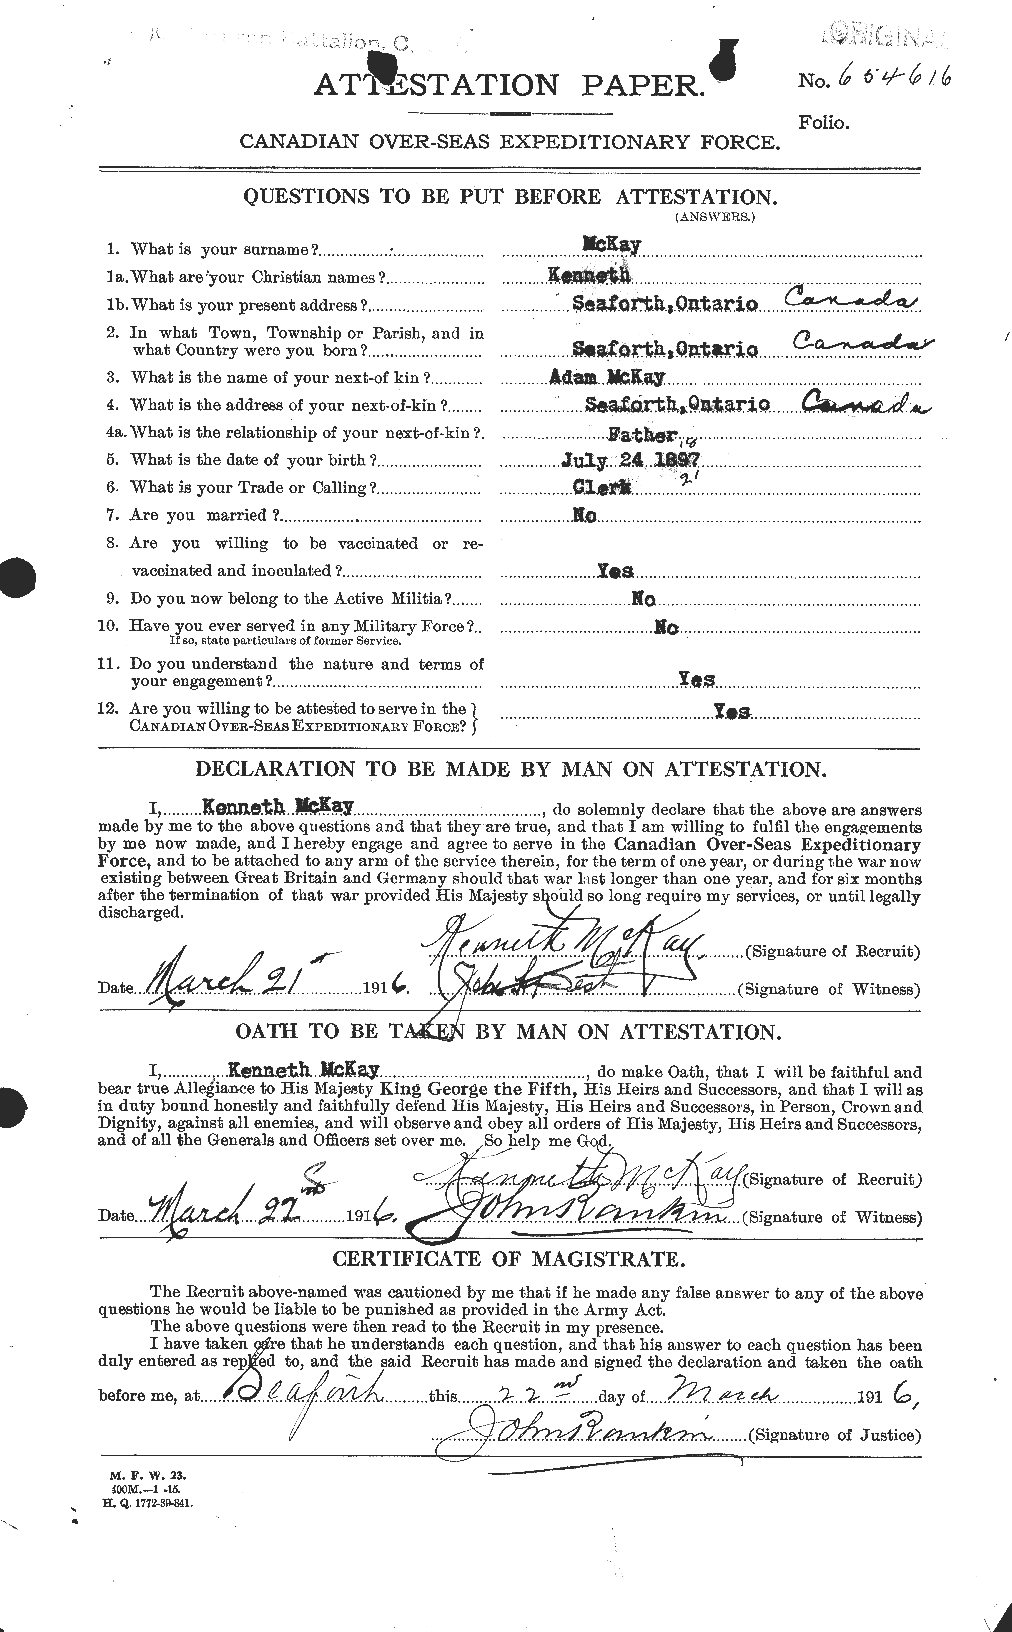 Personnel Records of the First World War - CEF 527126a